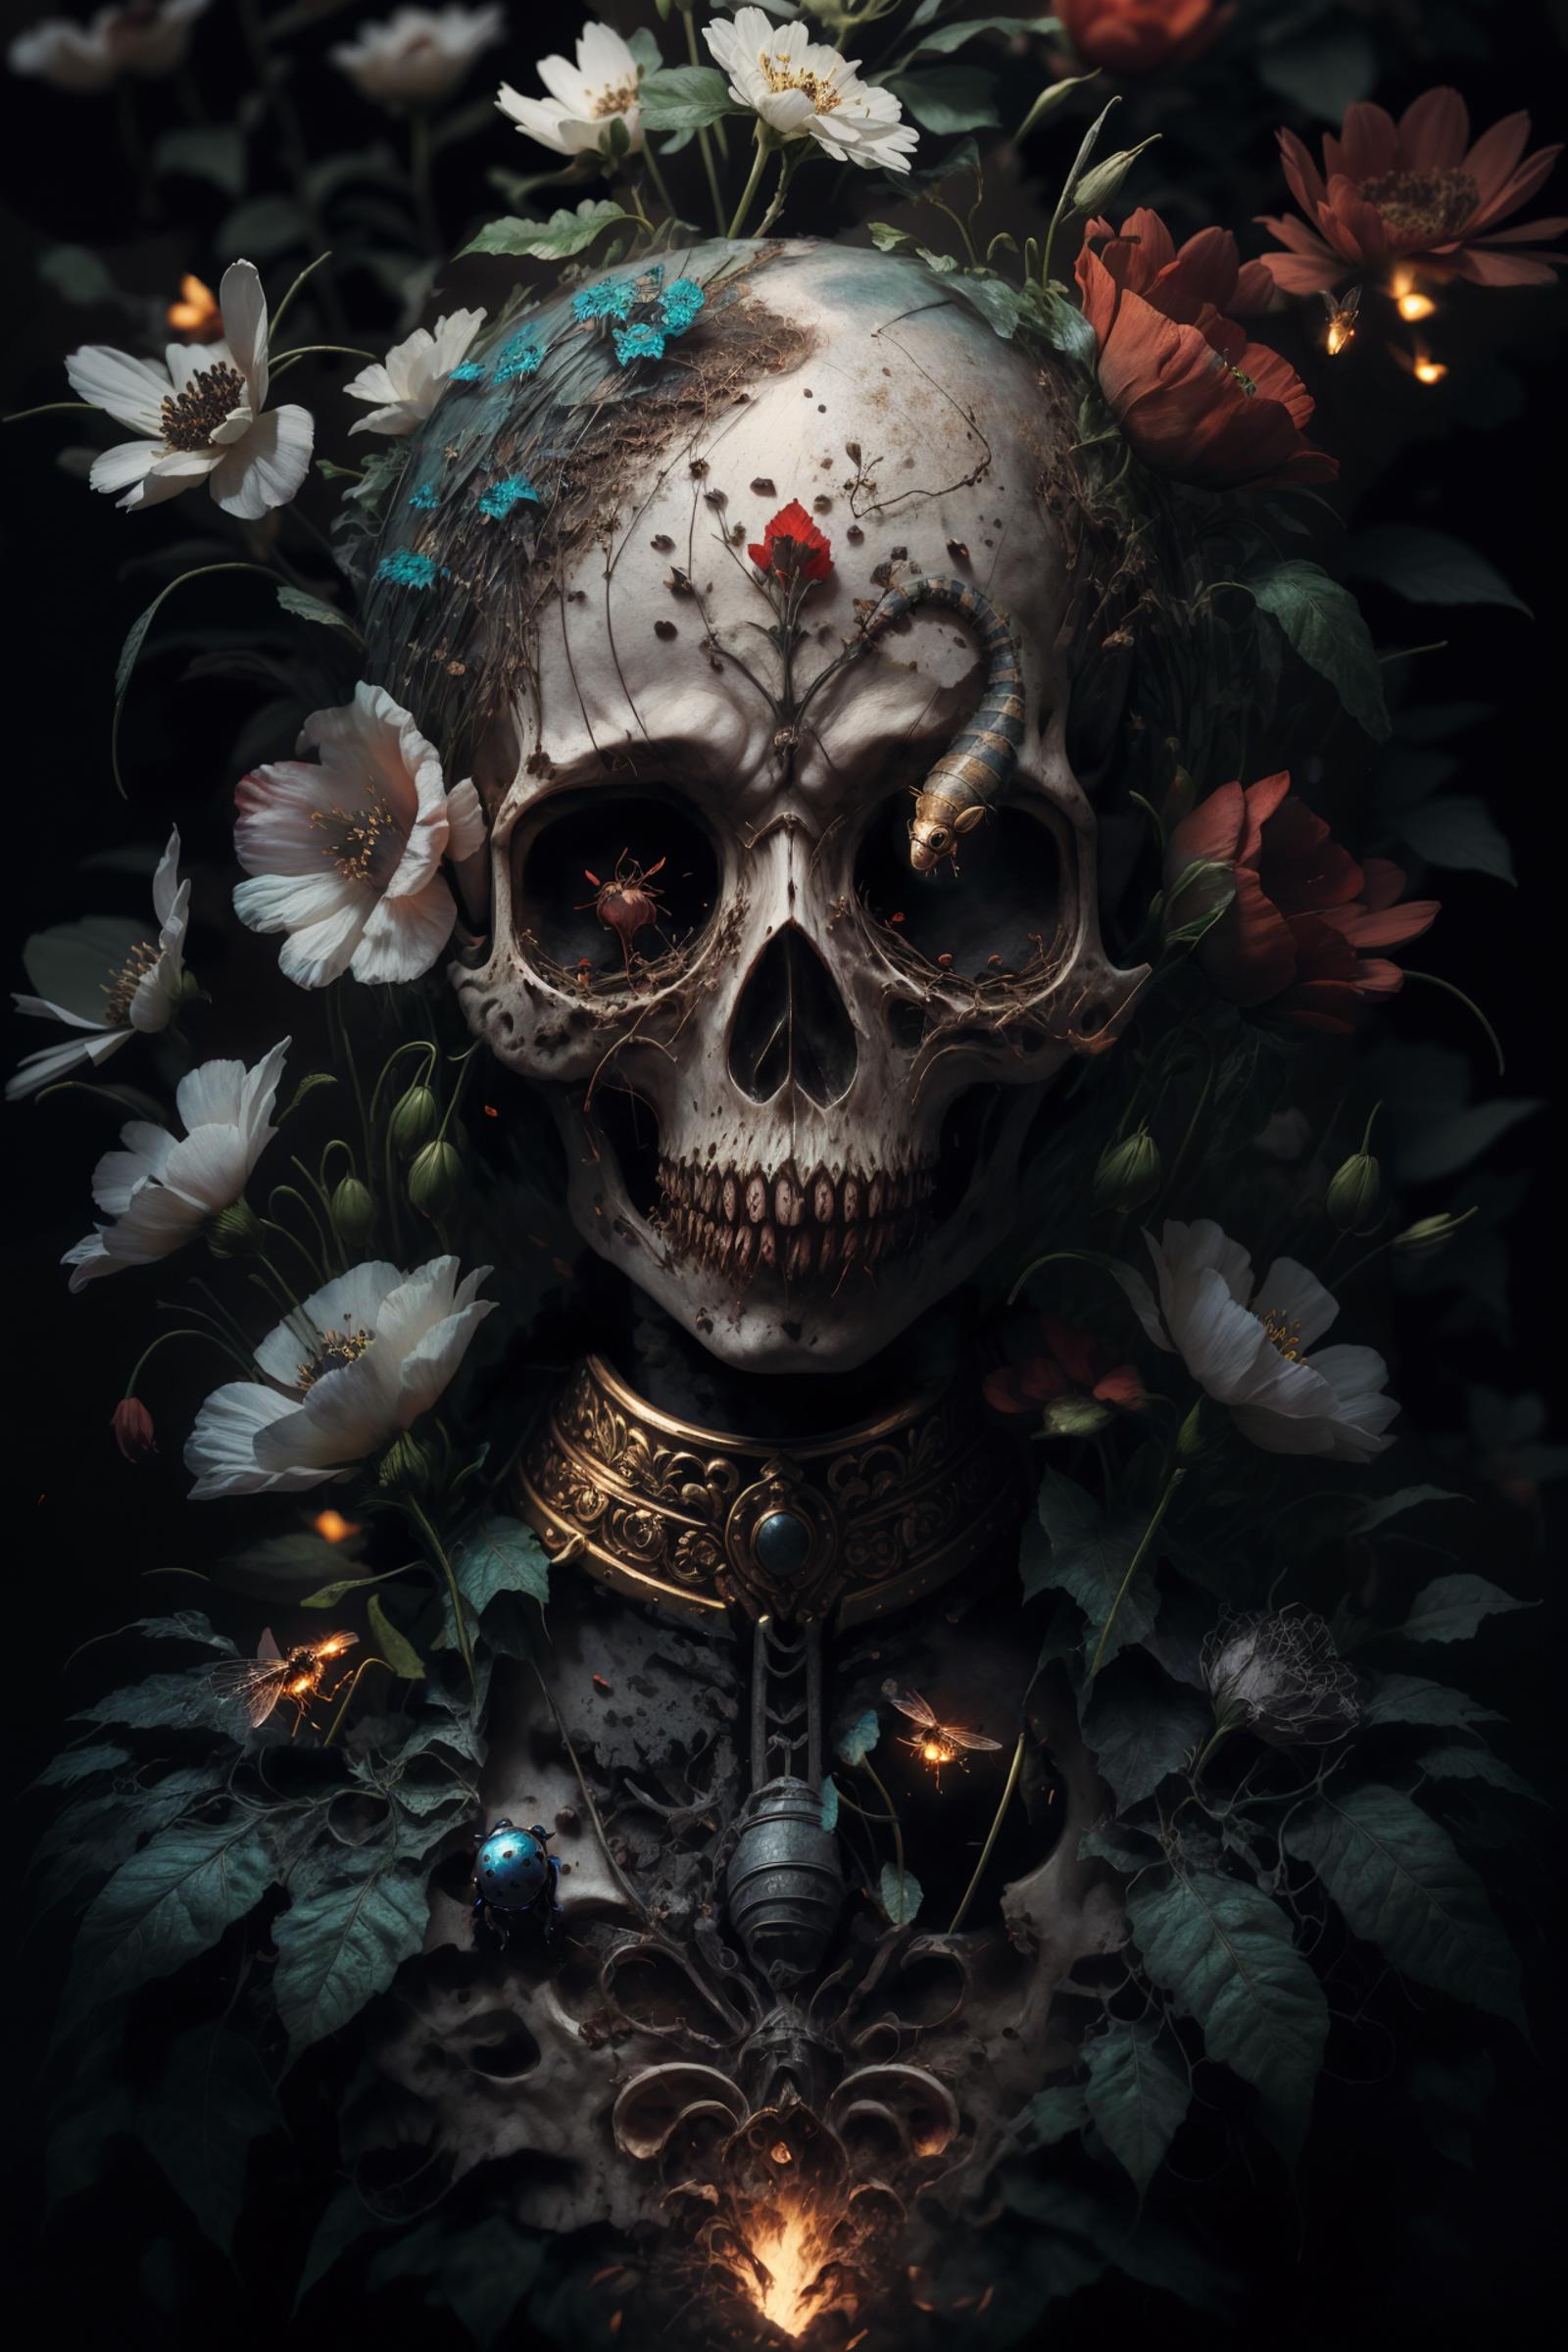 A skull with flowers and a snake as a necklace.